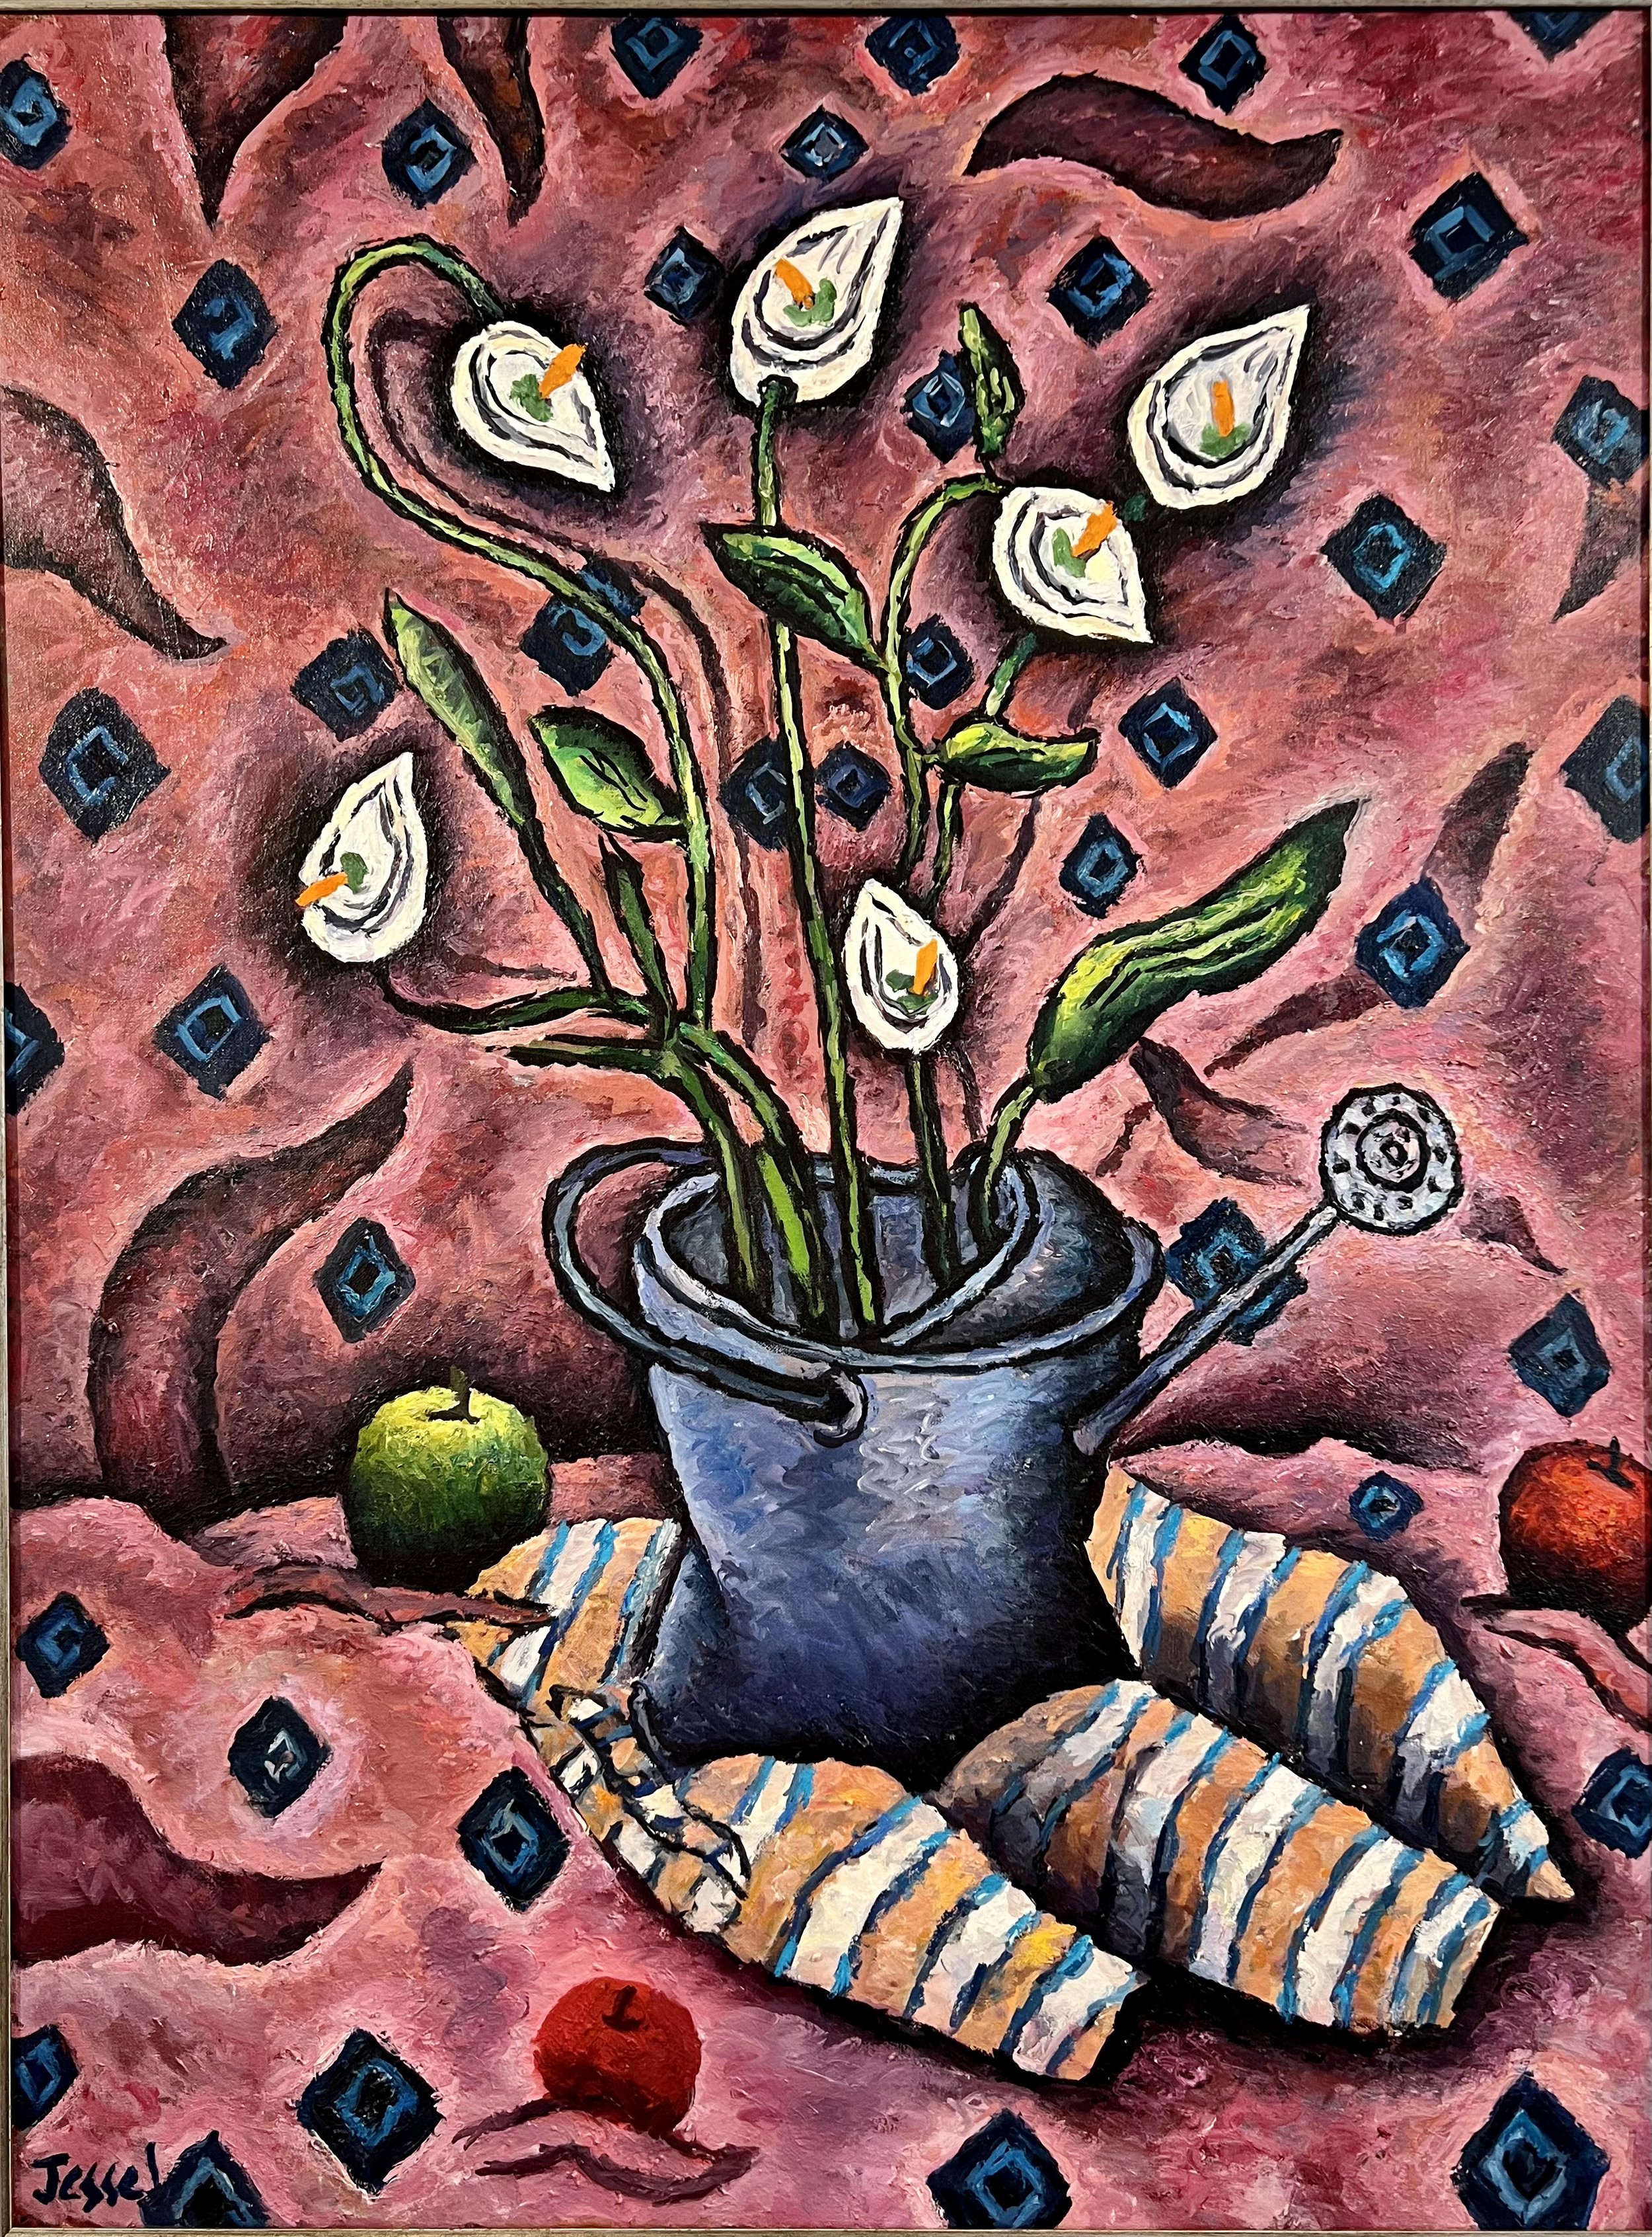  “LILIES”, 2019, OIL ON CANVAS, 40”/30” 